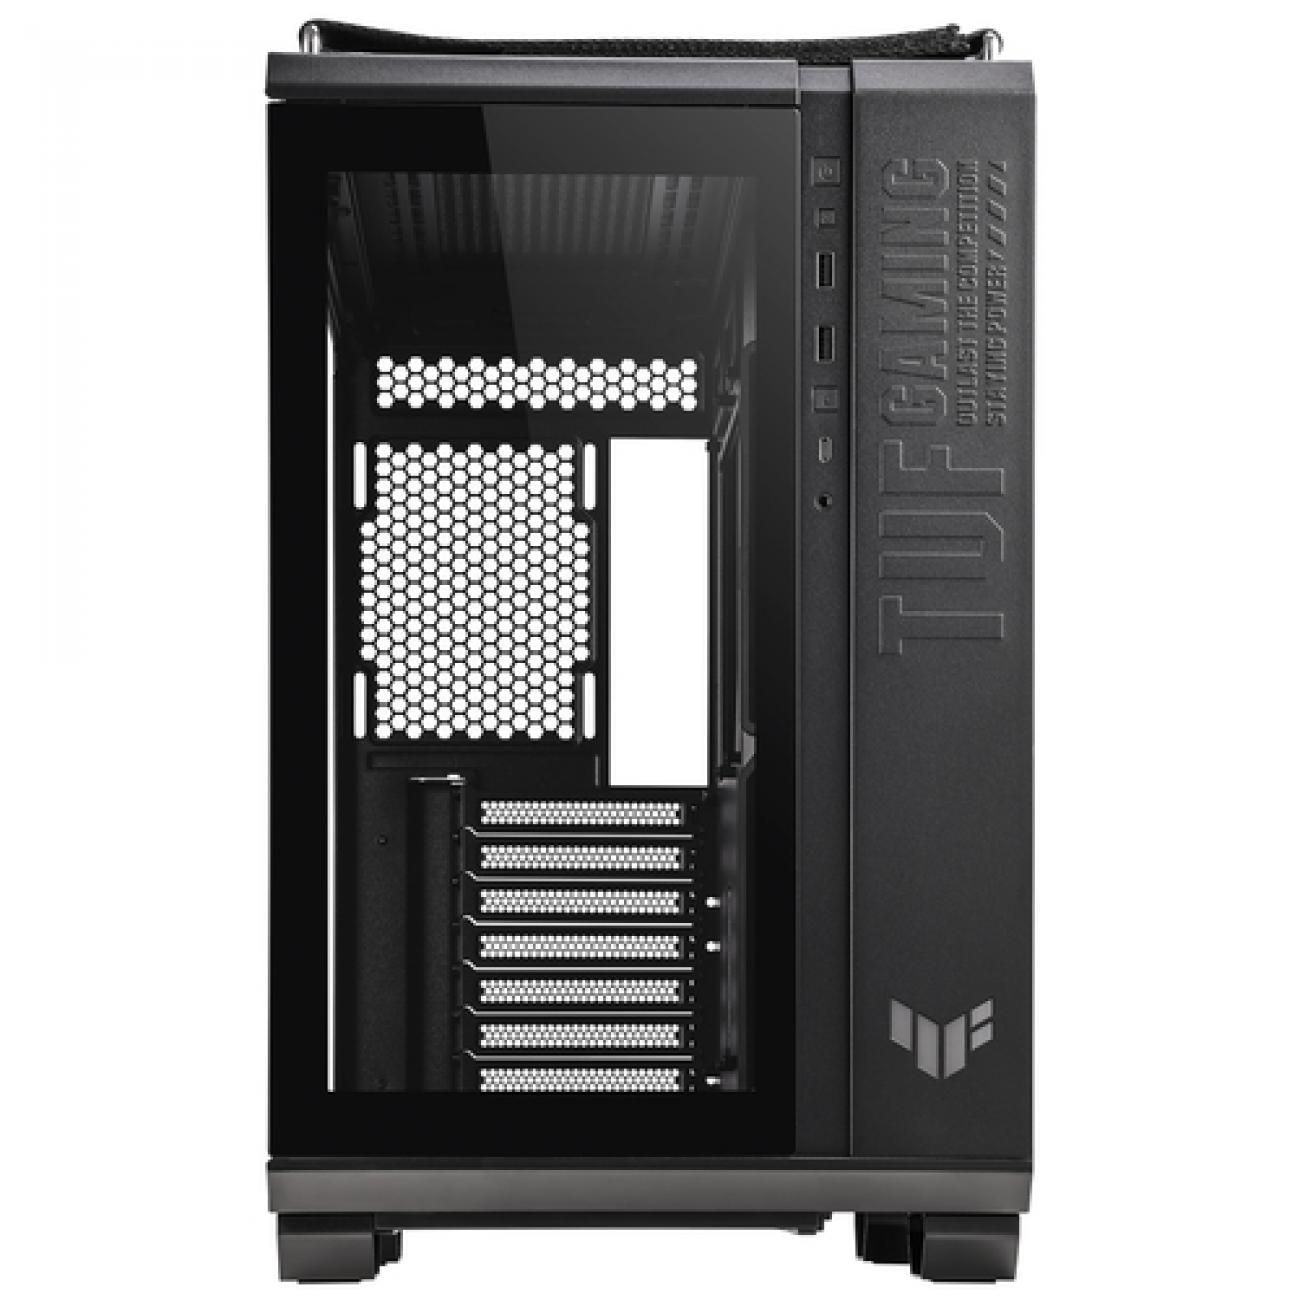 ASUS CASE GAMING GT502 TUF GAMING MID TOWER, 8 3 SLOT ESPANSIONE, 3X120MM FAN FRONT, 2X120MM FAN FRONT, BLACK